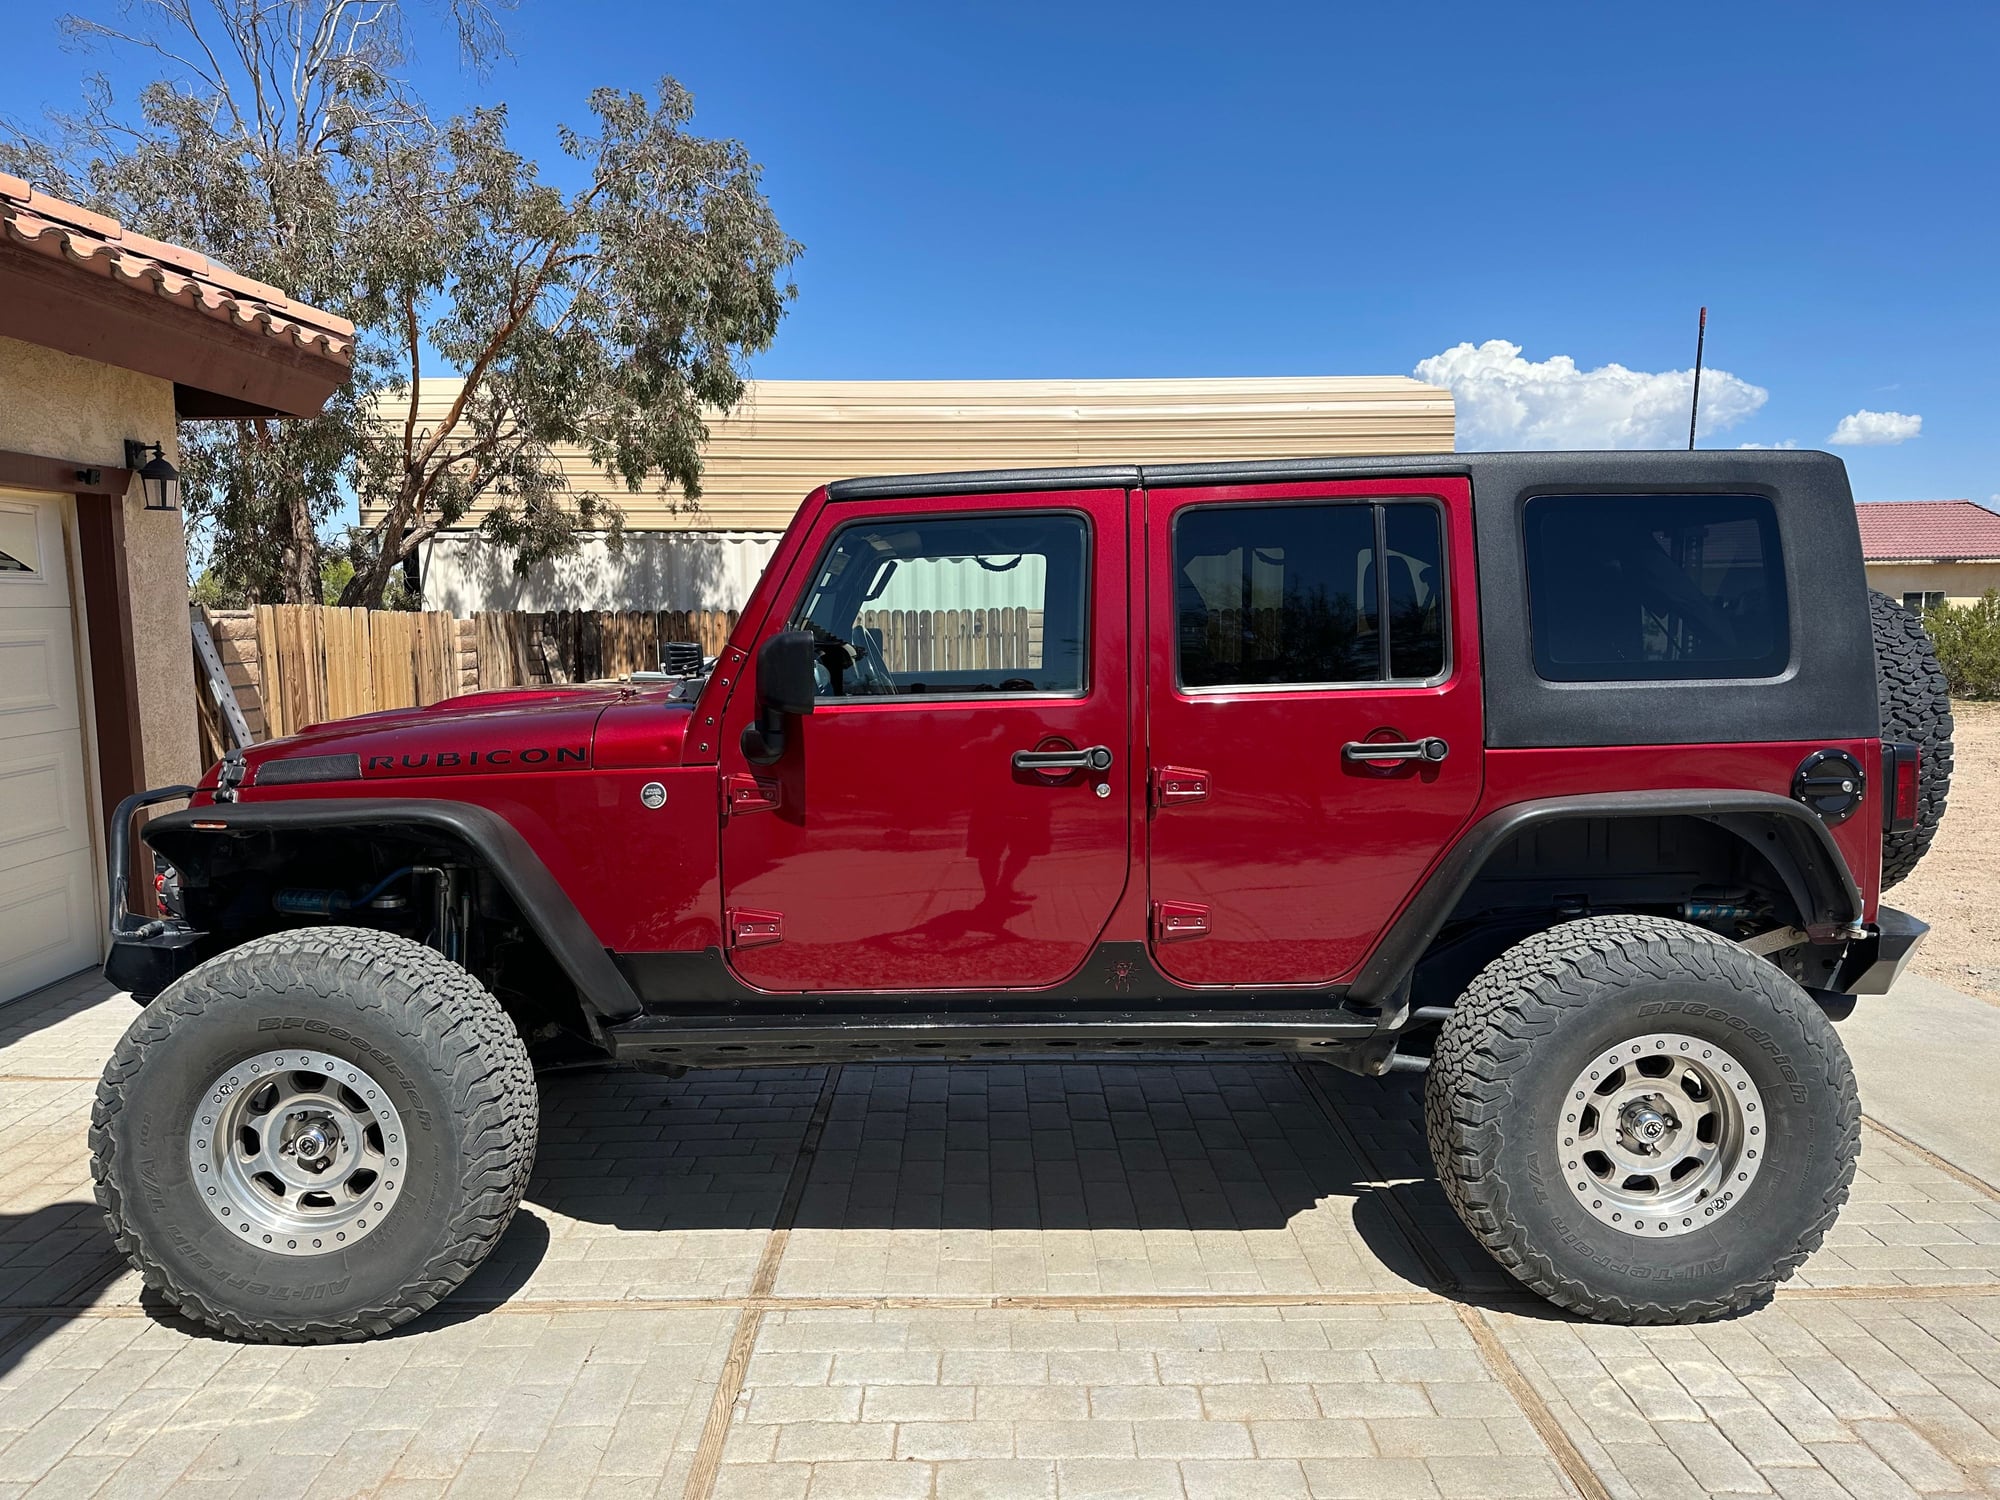 2012 Jeep Wrangler - 2012 JEEP Wrangler Rubicon Unlimited - Used - VIN 1C4HJWFG4CL276739 - 130,300 Miles - 6 cyl - 4WD - Automatic - SUV - Other - Ridgecrest, CA 93555, United States